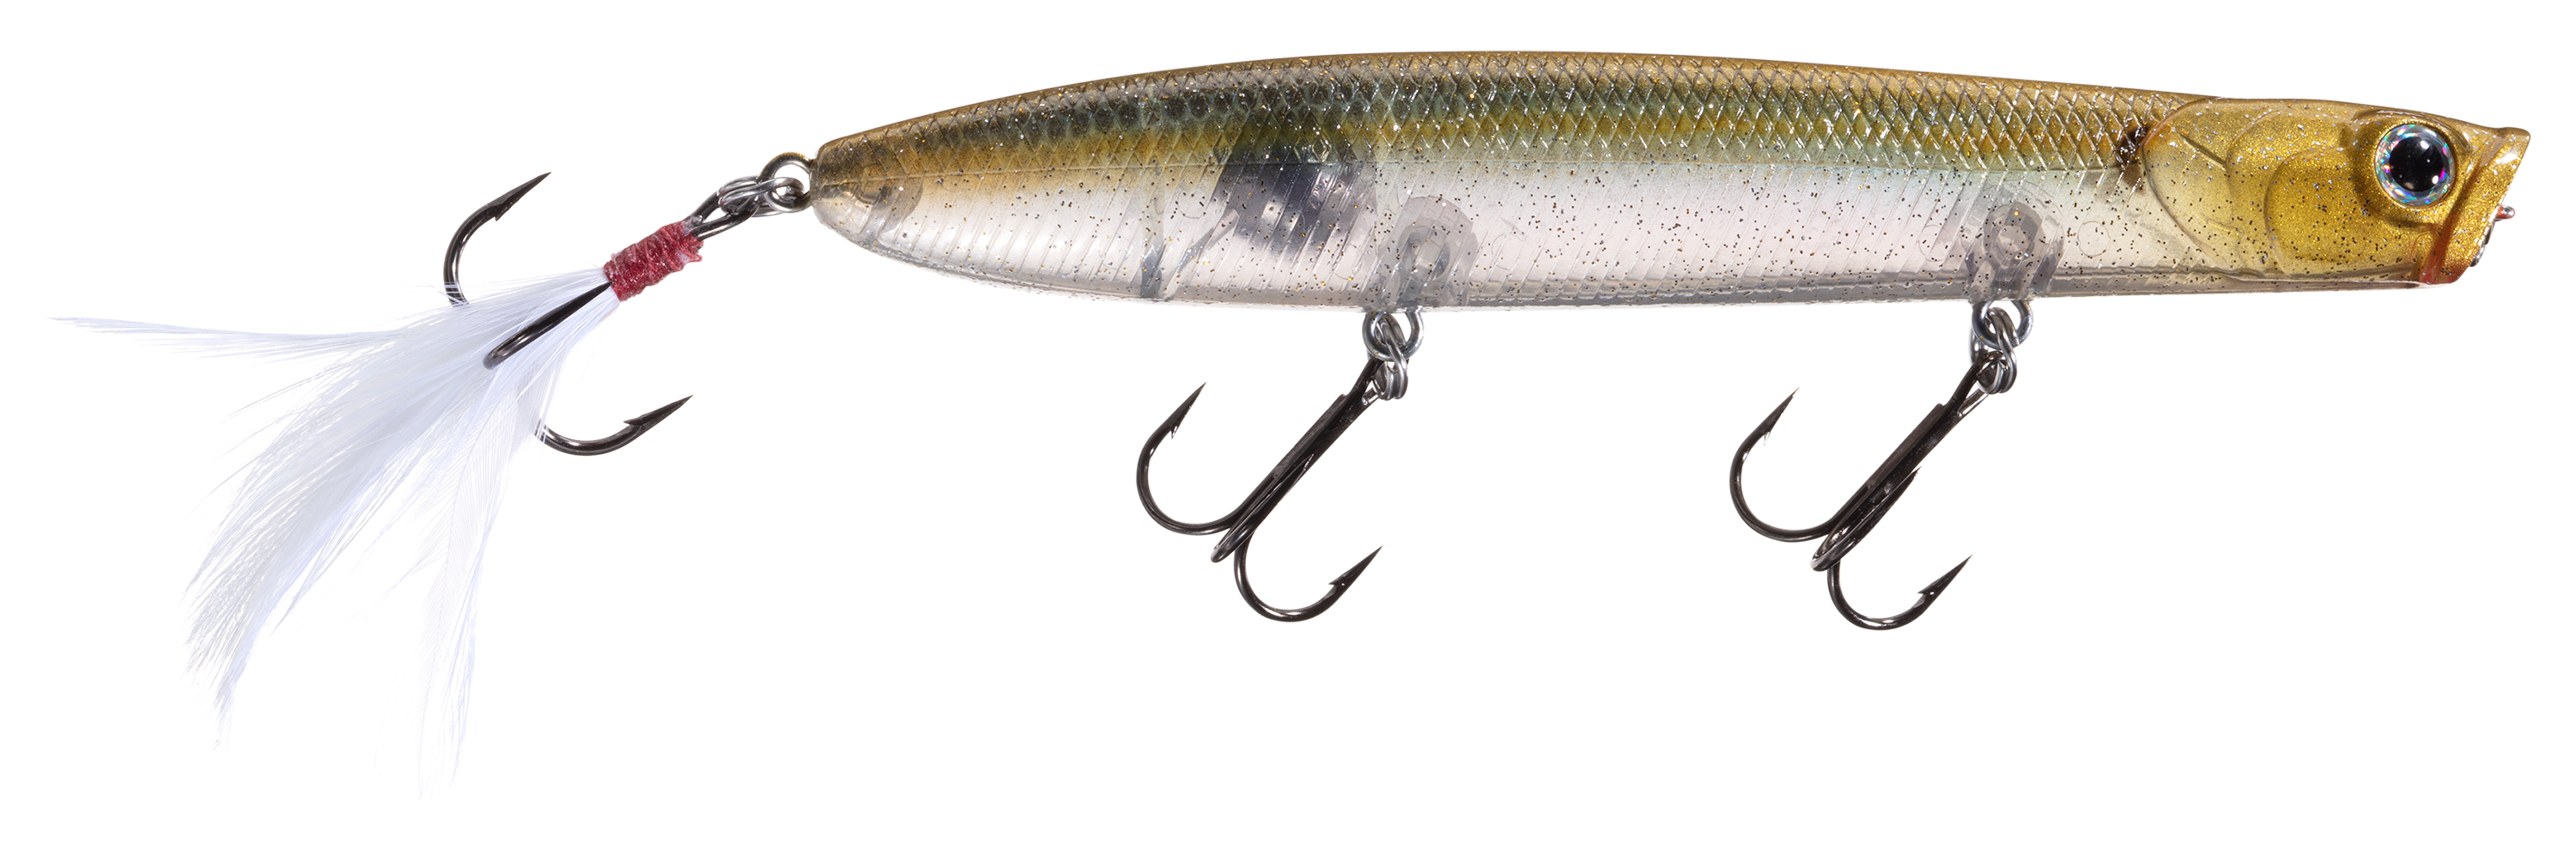 LUCKY CRAFT Gunfish 115 - 269 BE Gill (1qty) Top Quality Topwater .